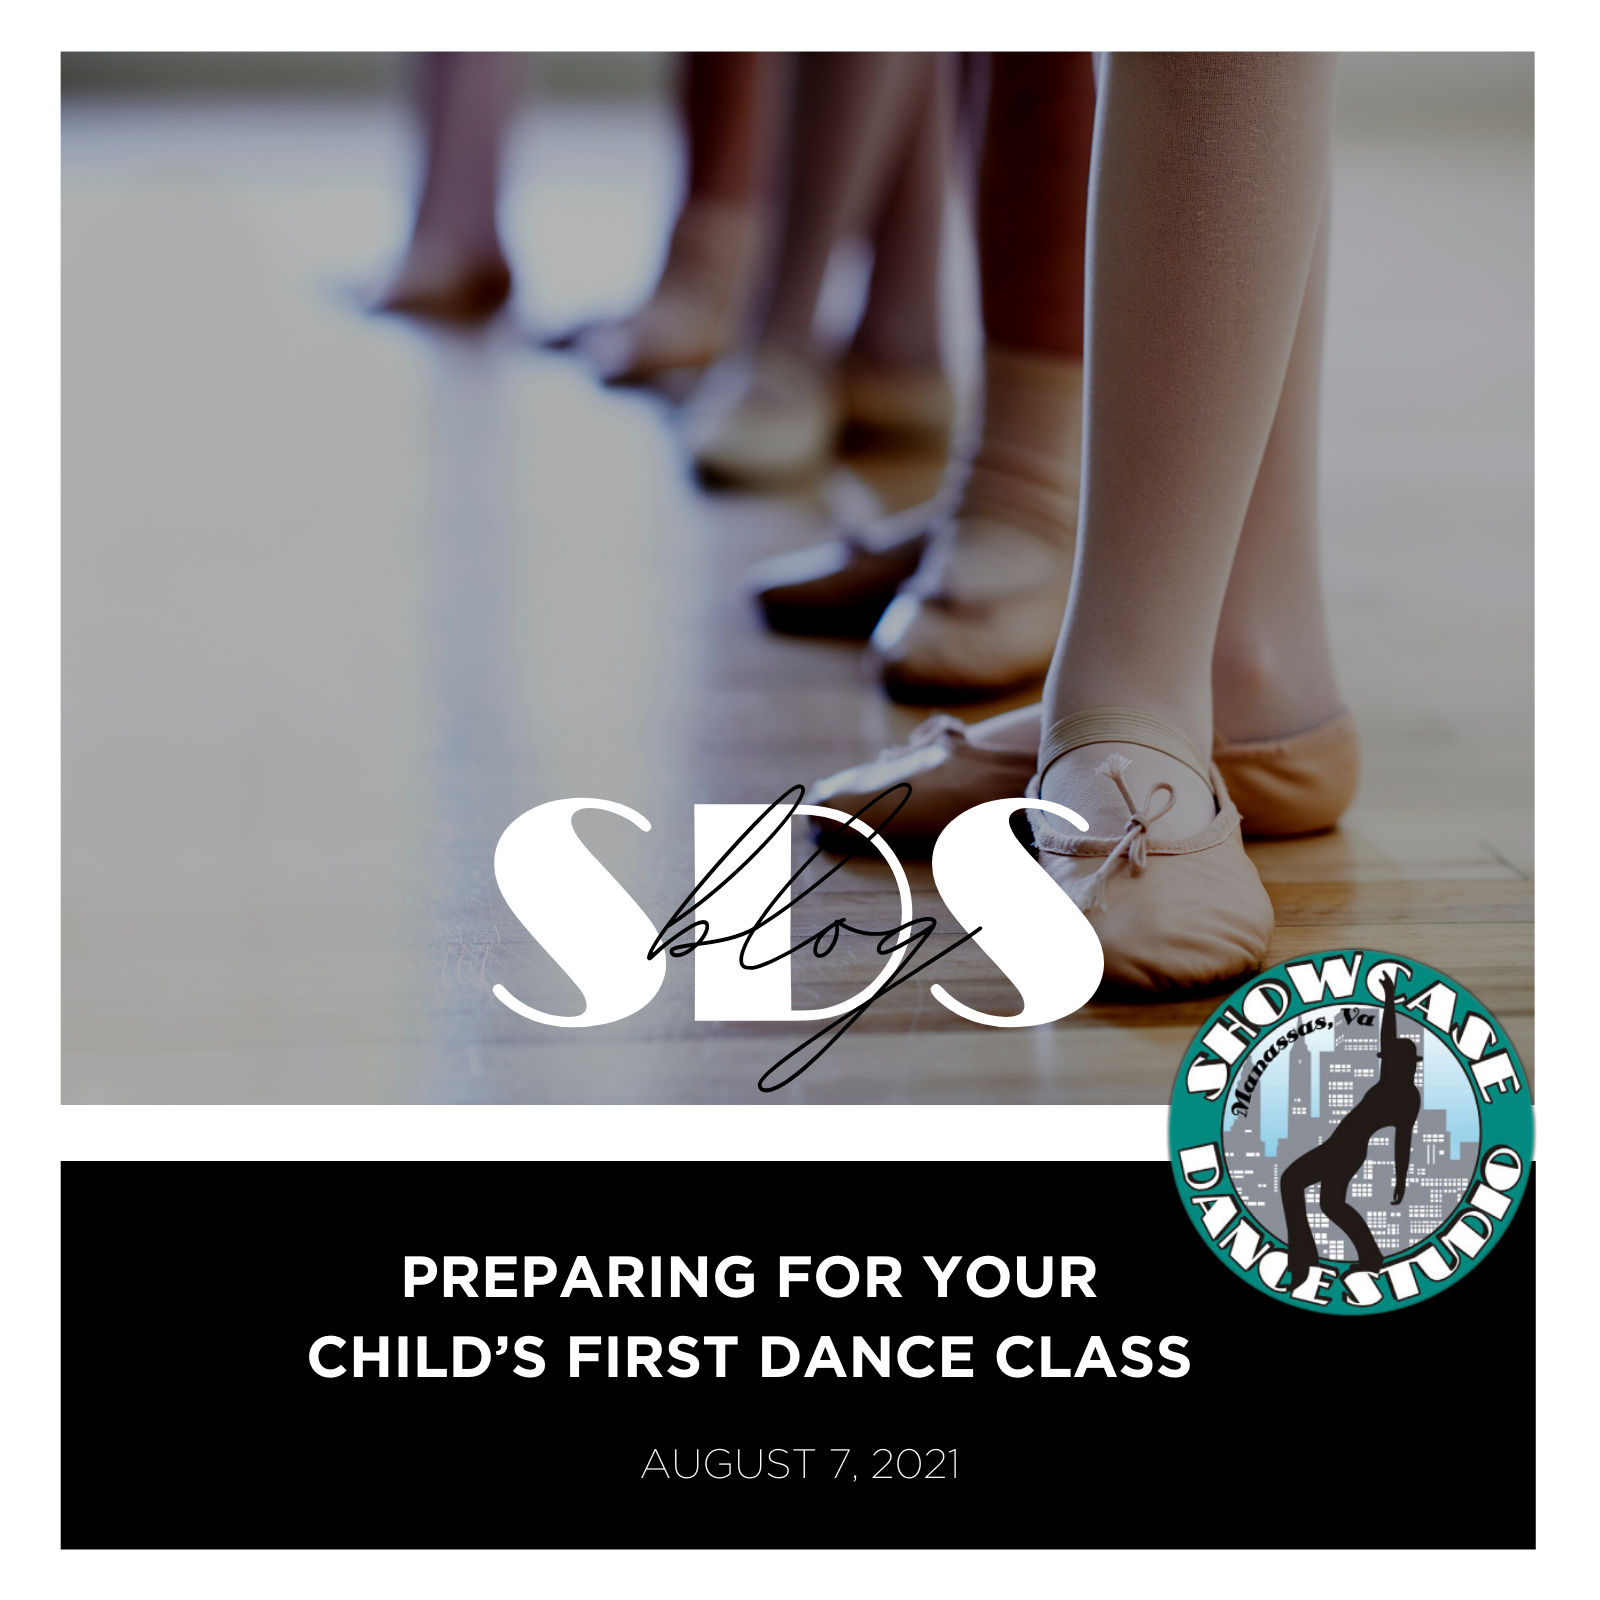 Preparing for Your Child’s First Dance Class